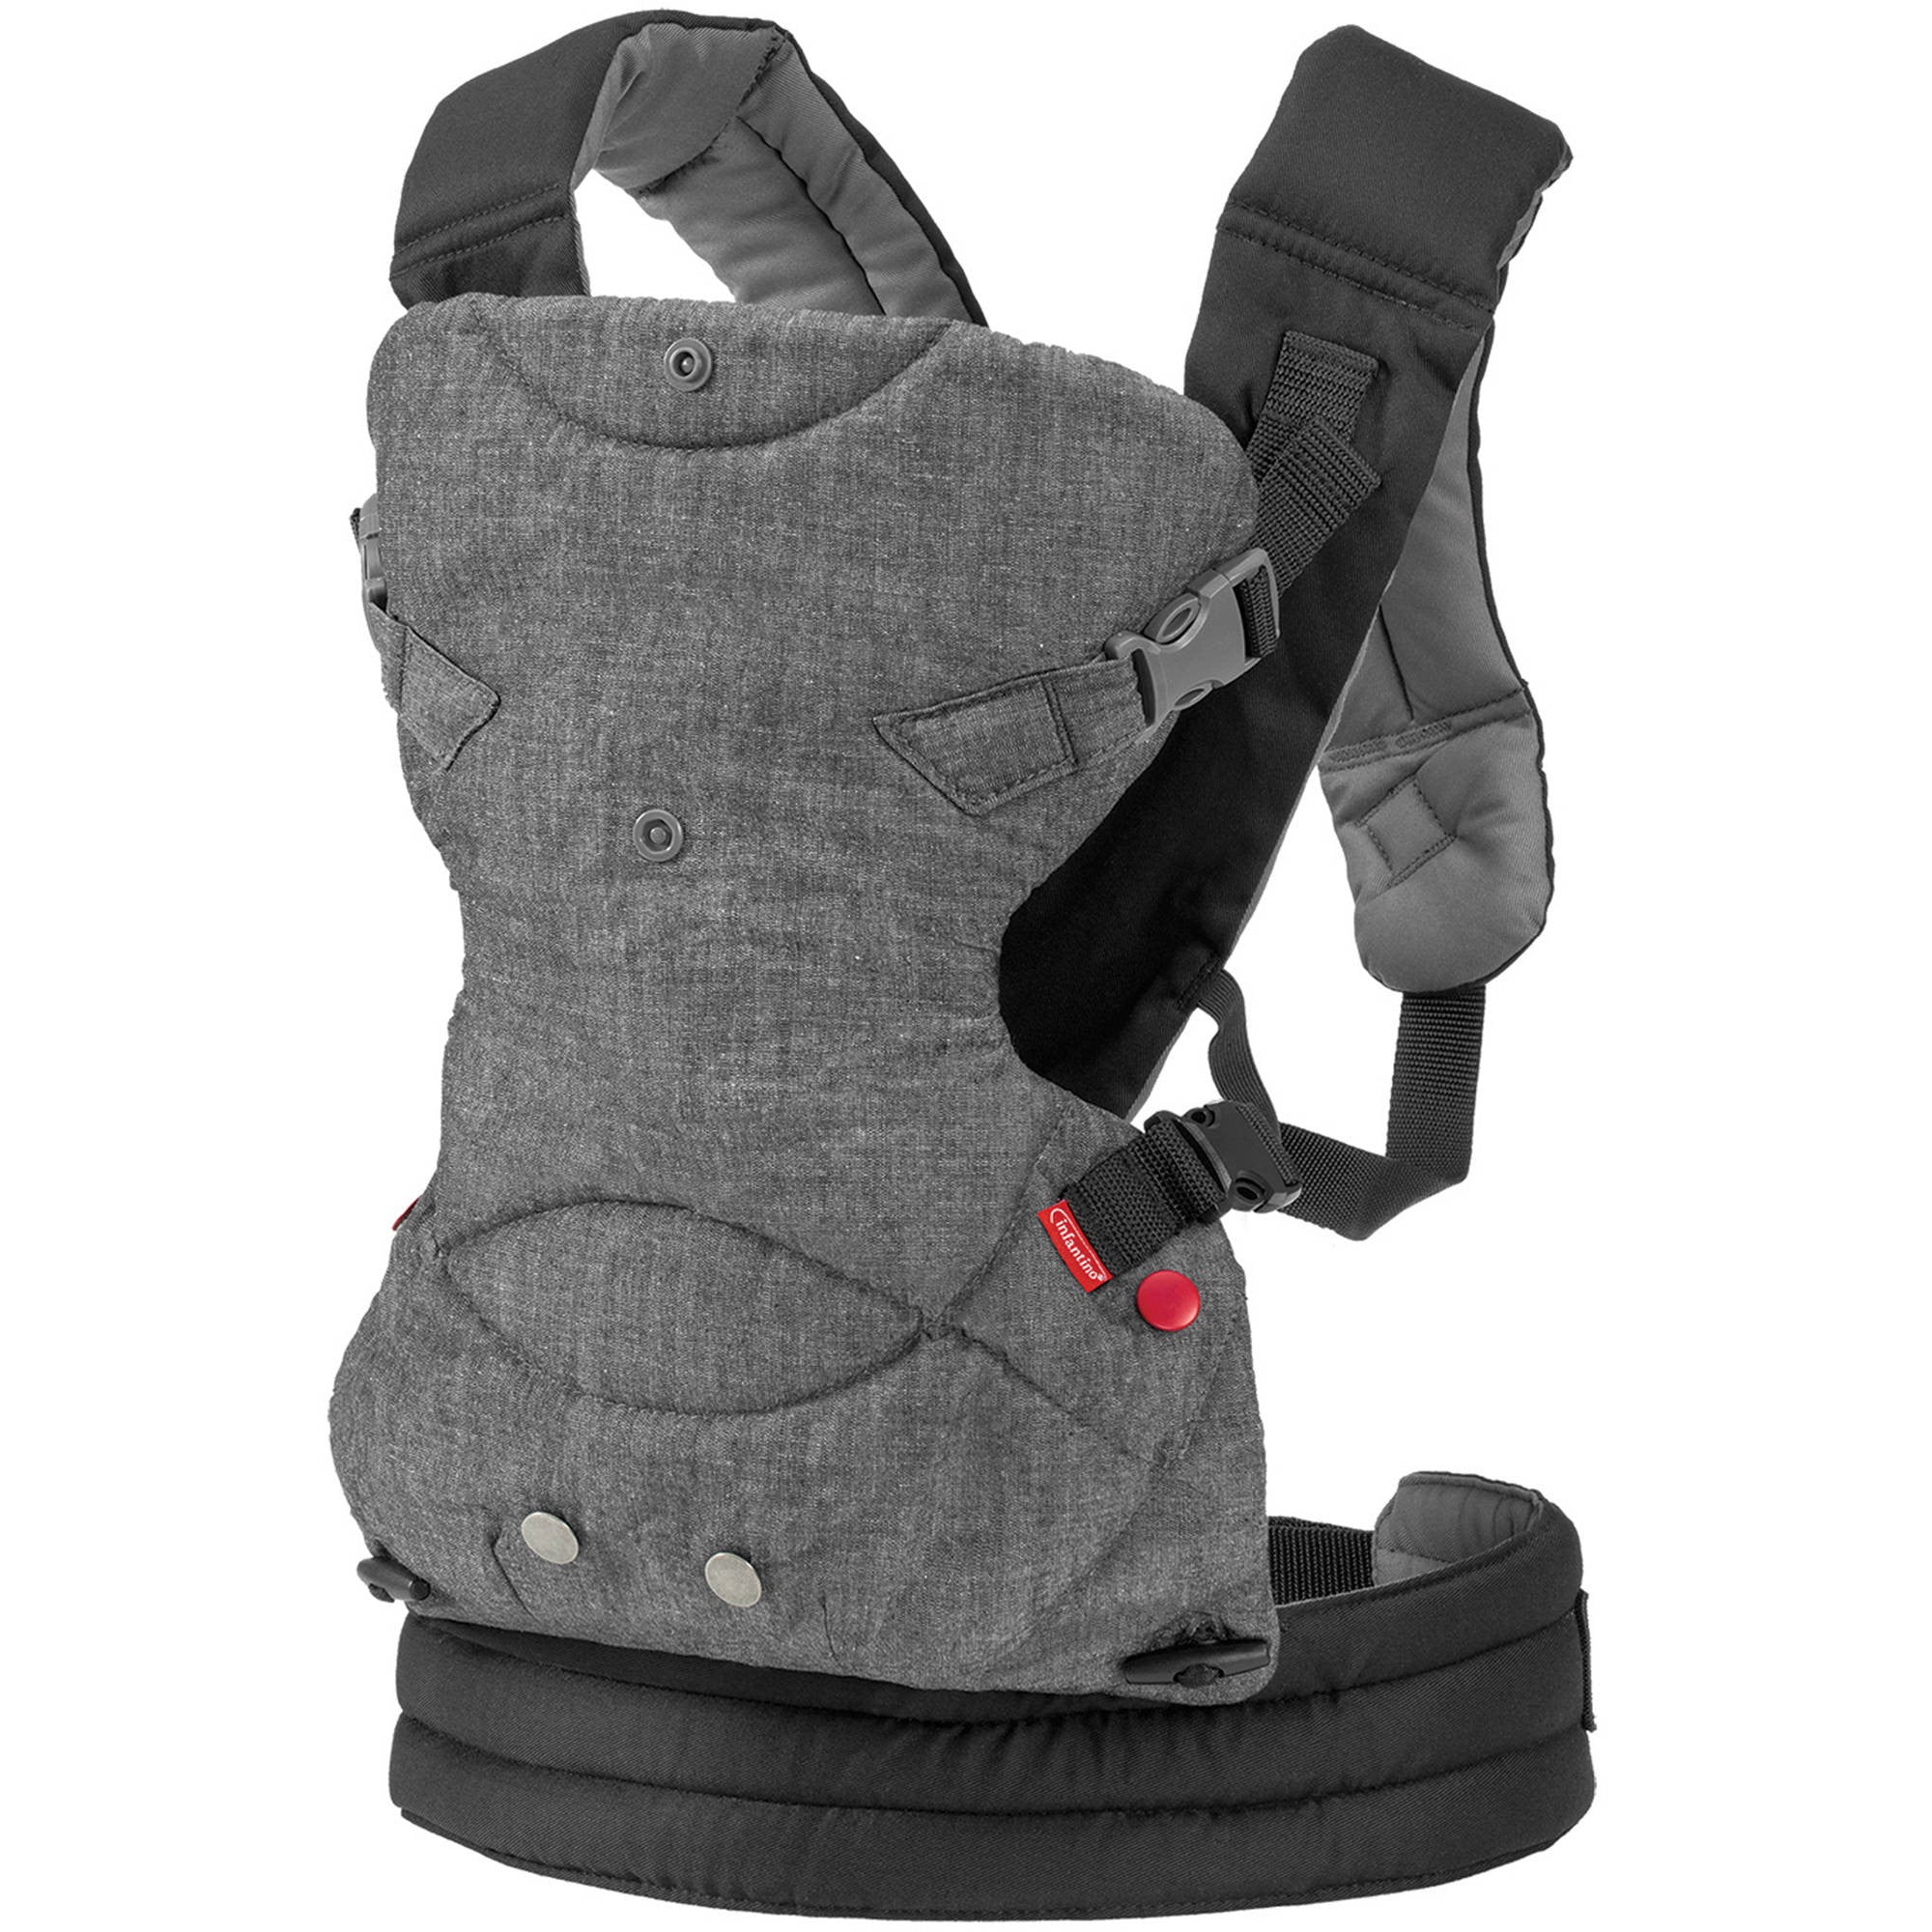 weight limit on infantino baby carrier